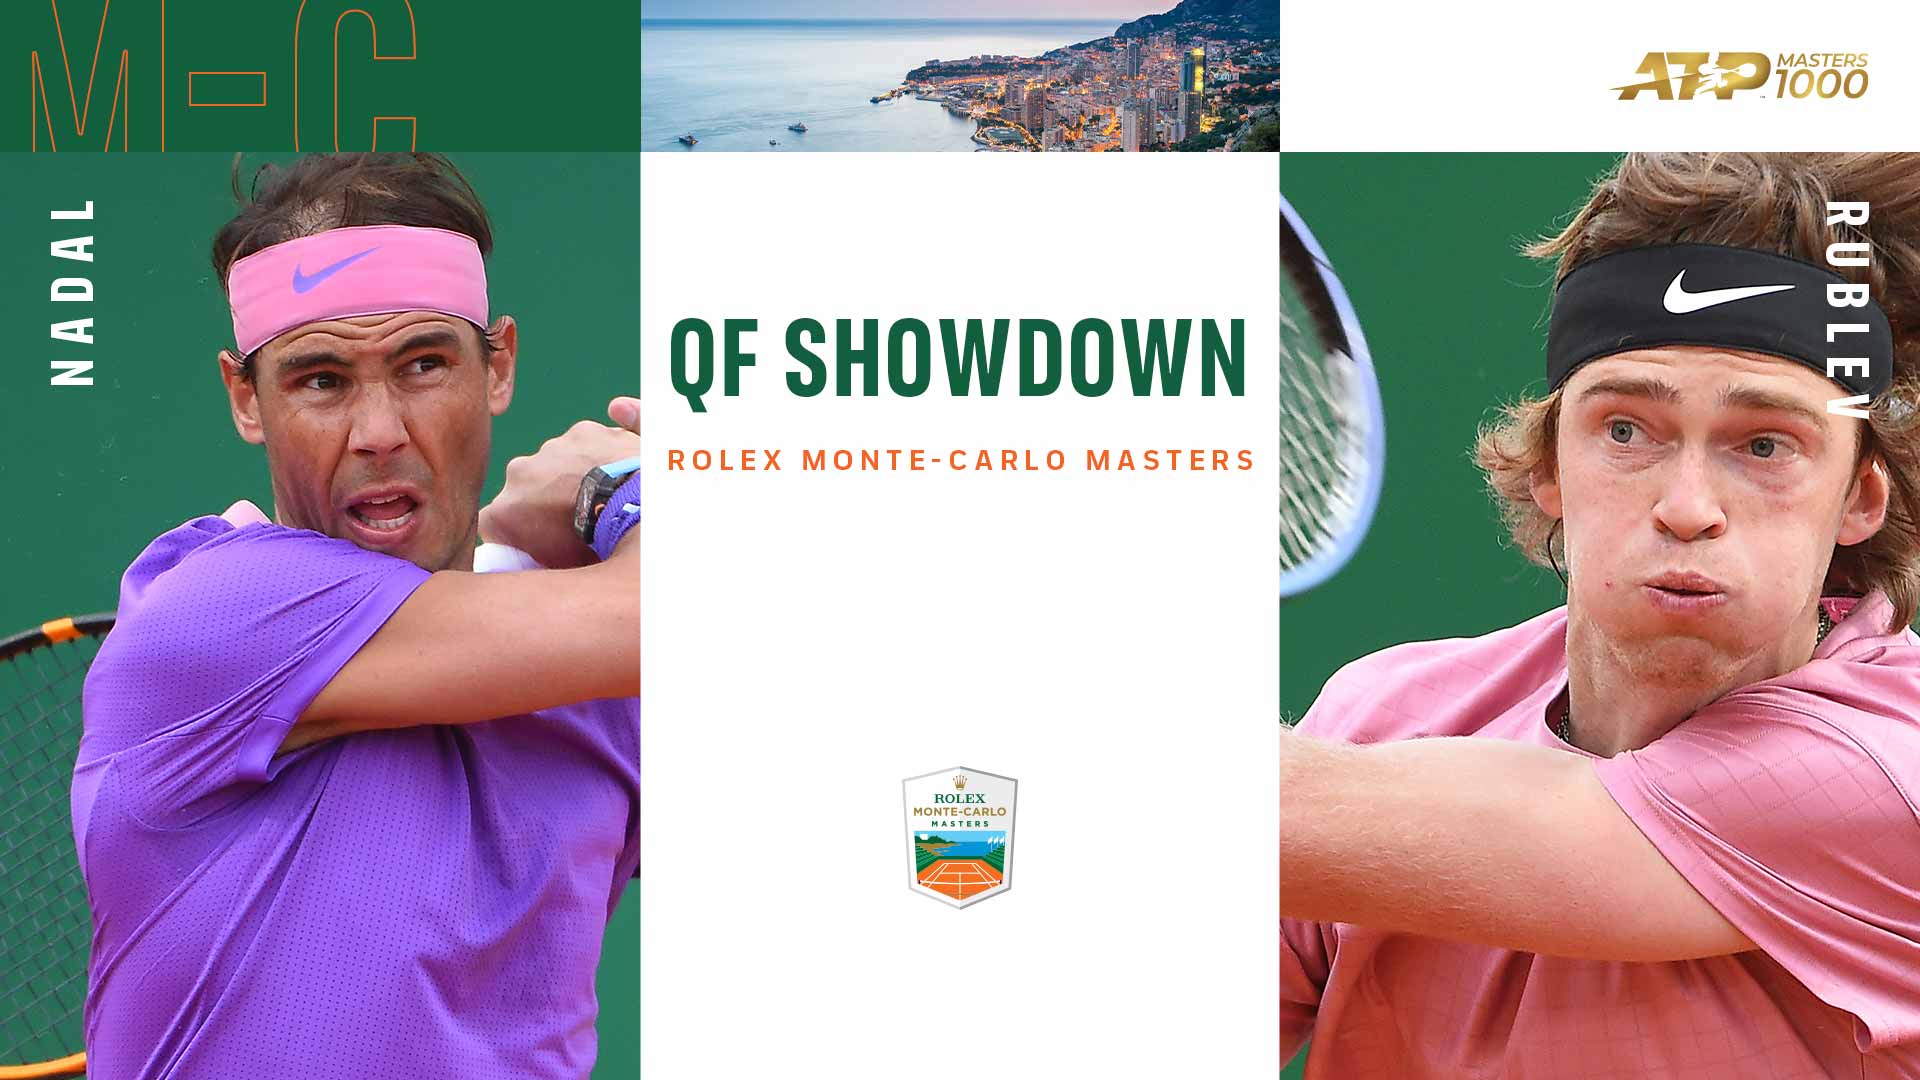 Friday Preview Rublev To Battle Nadal in Monte-Carlo ATP Tour Tennis